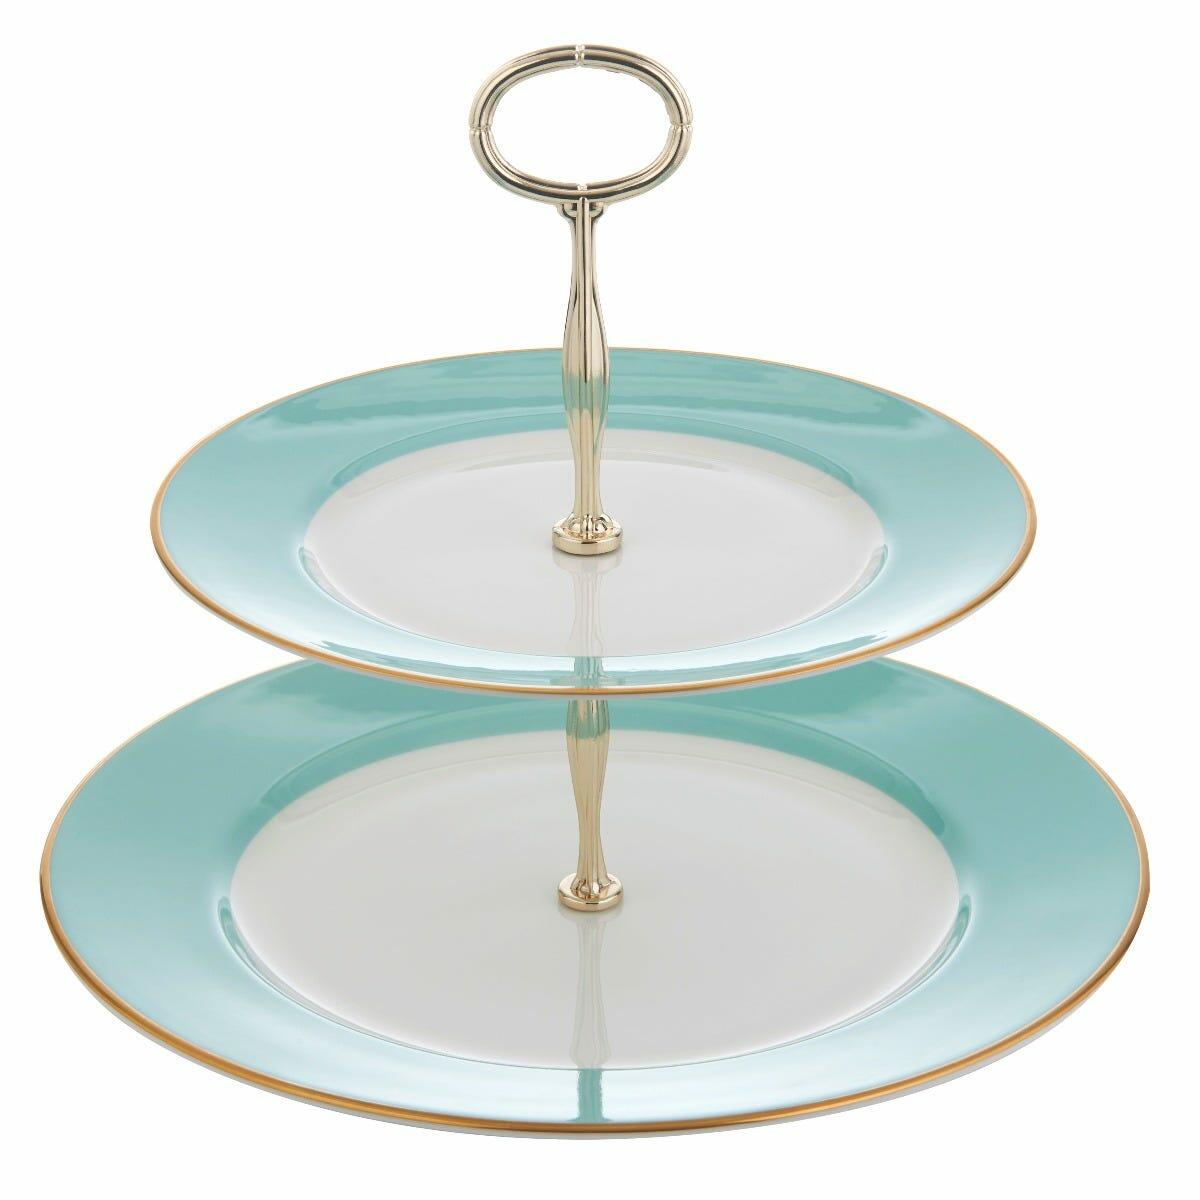 Fortnum & Mason St James Two Tier Cake Stand